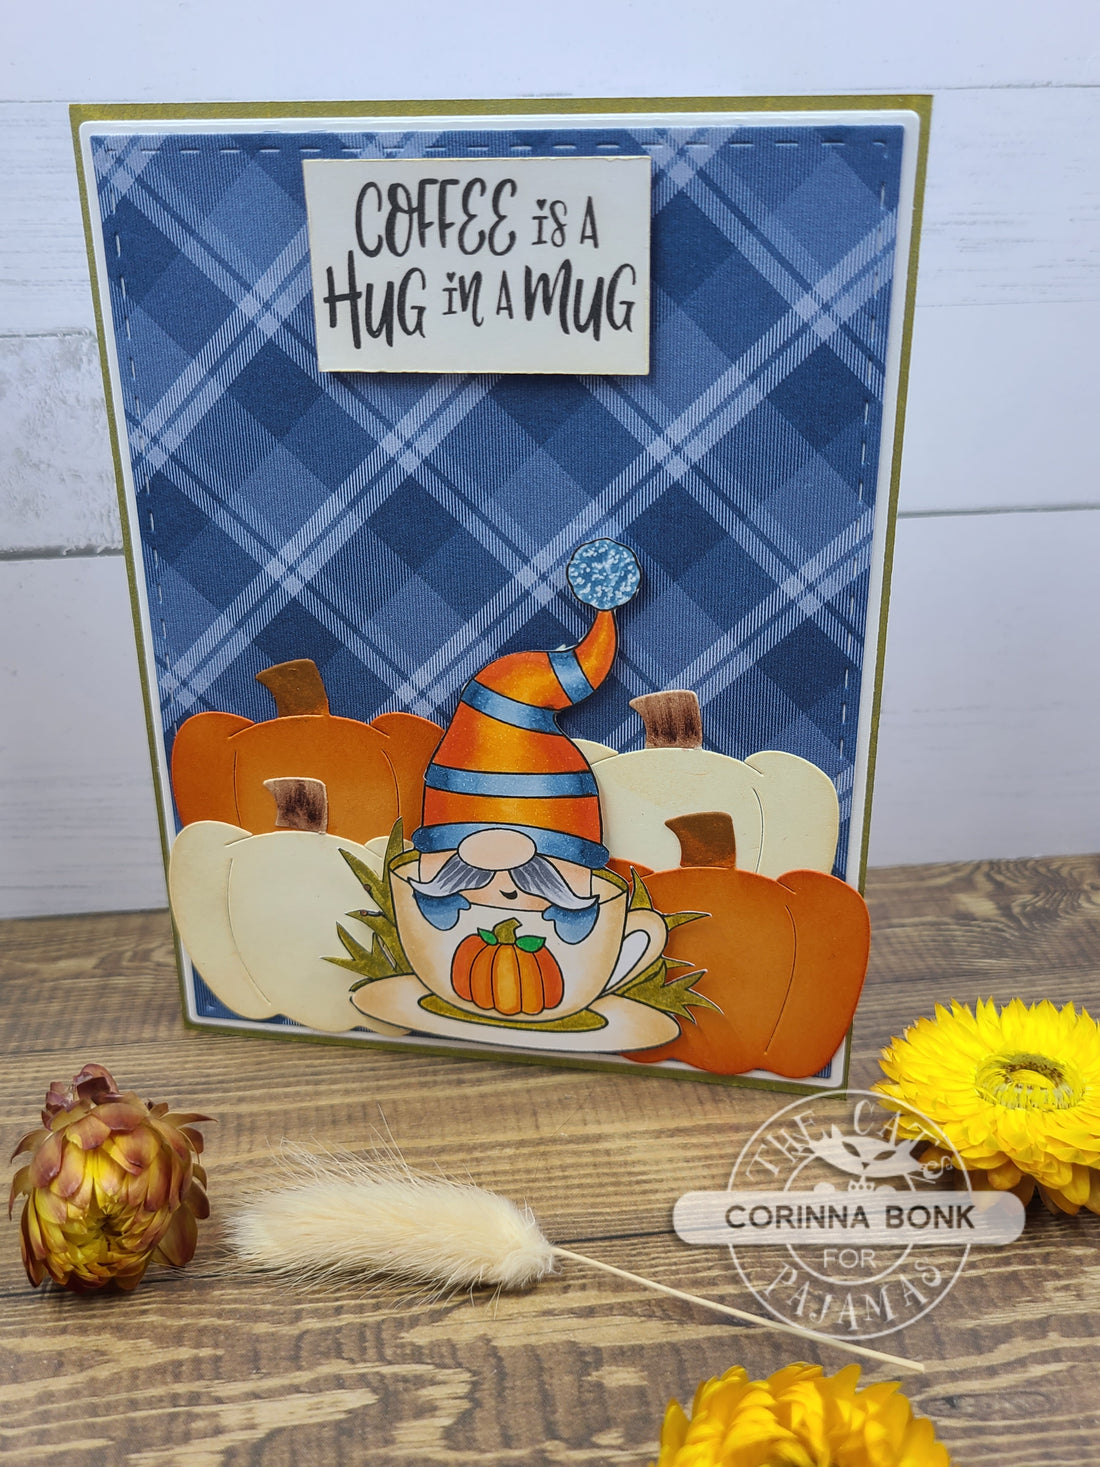 It's Almost Fall Already! Time for all Things Pumpkin!